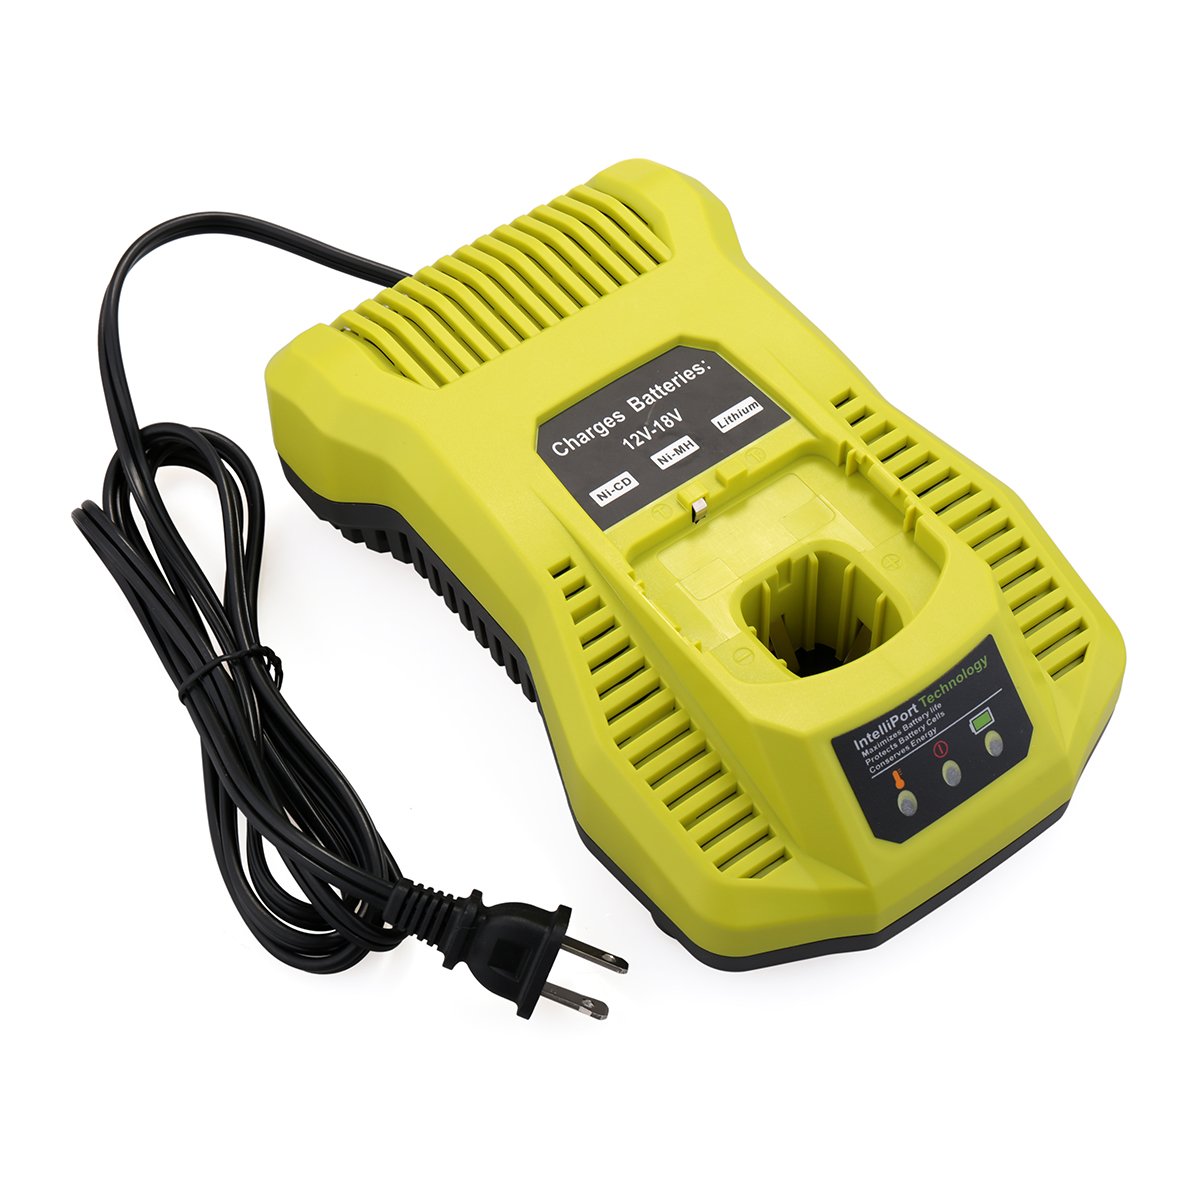 Ryobi-12V-18V-P117-Battery-Charger-Lithium-Battery-Nickel-Charge-Replacement-for-Ryobi-One-Plus-P100-1828672-10